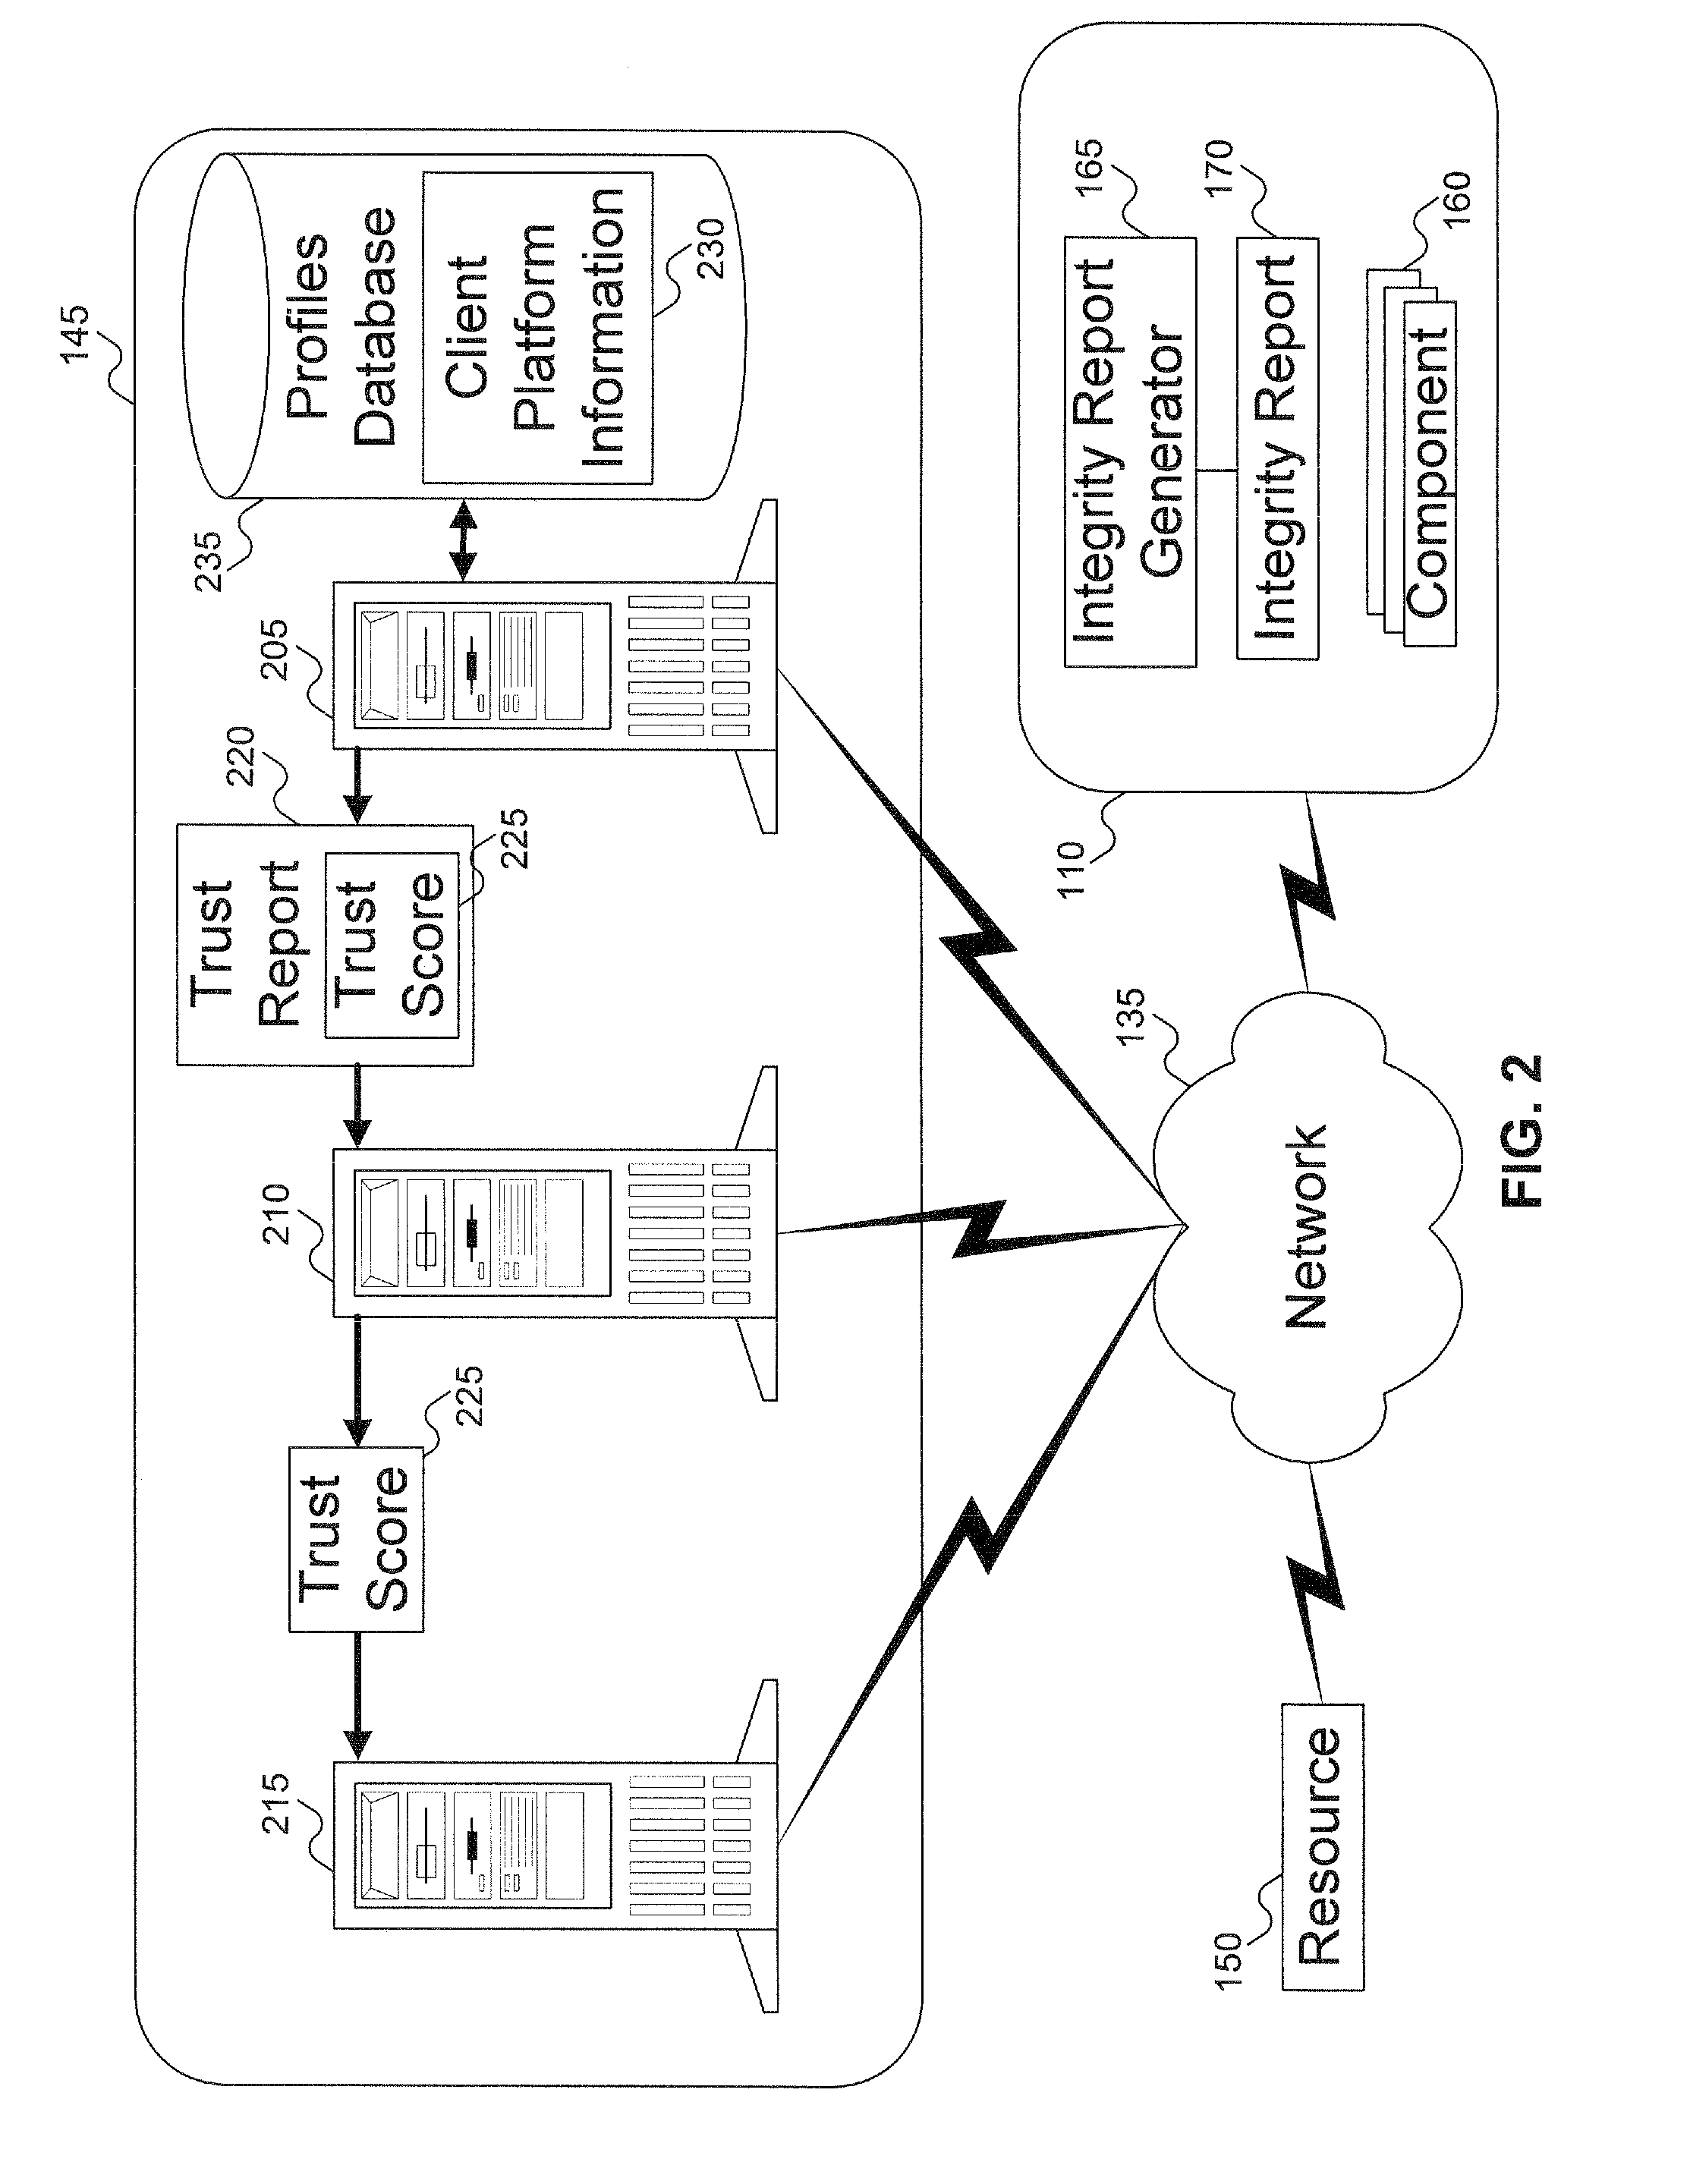 Method to verify the integrity of components on a trusted platform using integrity database services